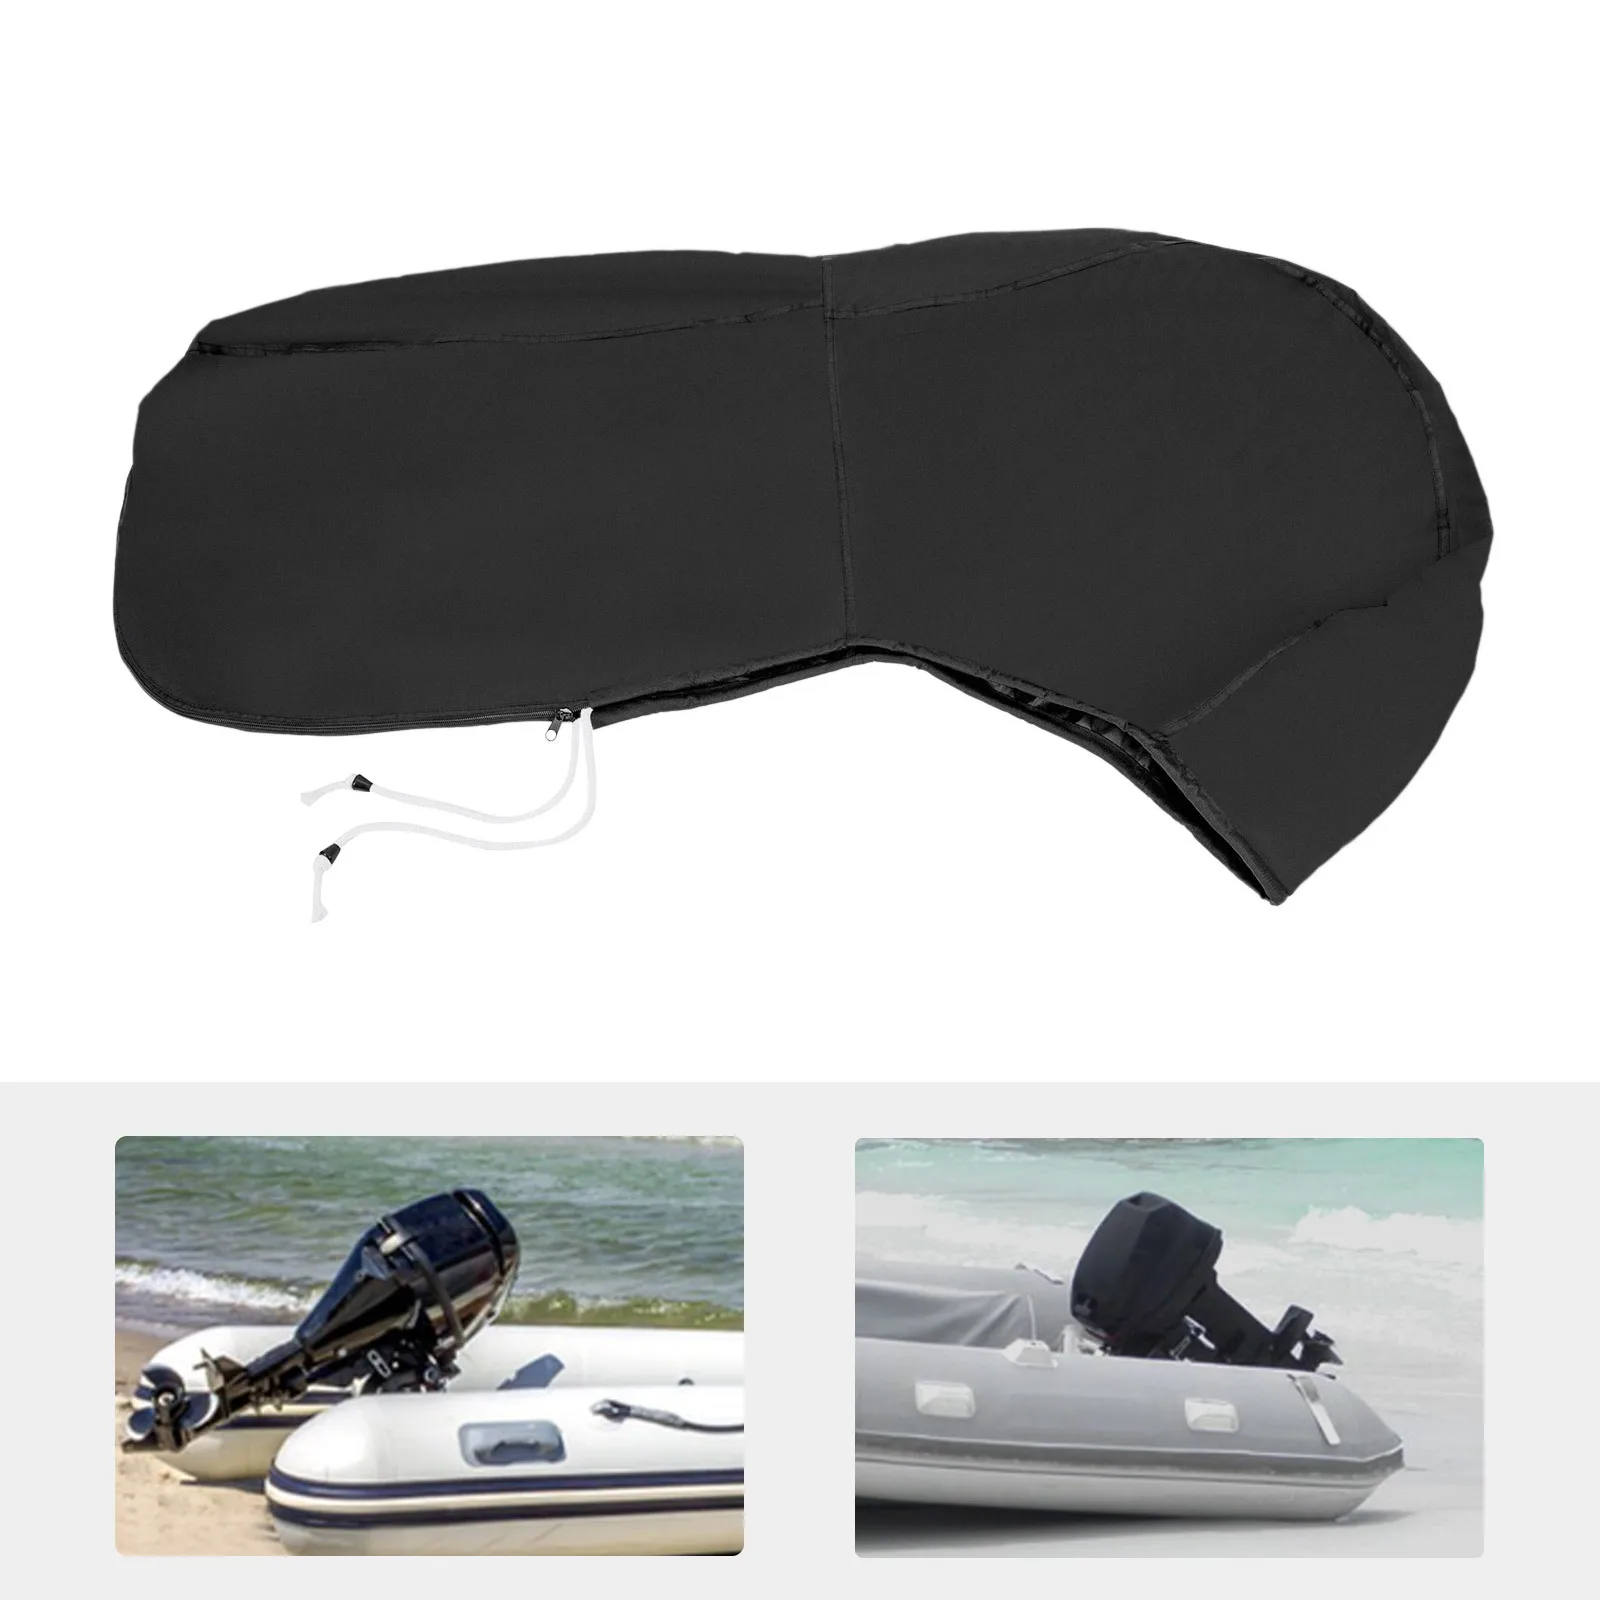 600D Oxford Cloth Waterproof Motor Full Outboard Boat Engine Cover with a Zippered Storage Bagfor 6-15HP Black Heat-resistant всепогодная акустика tannoy vxp 15hp black